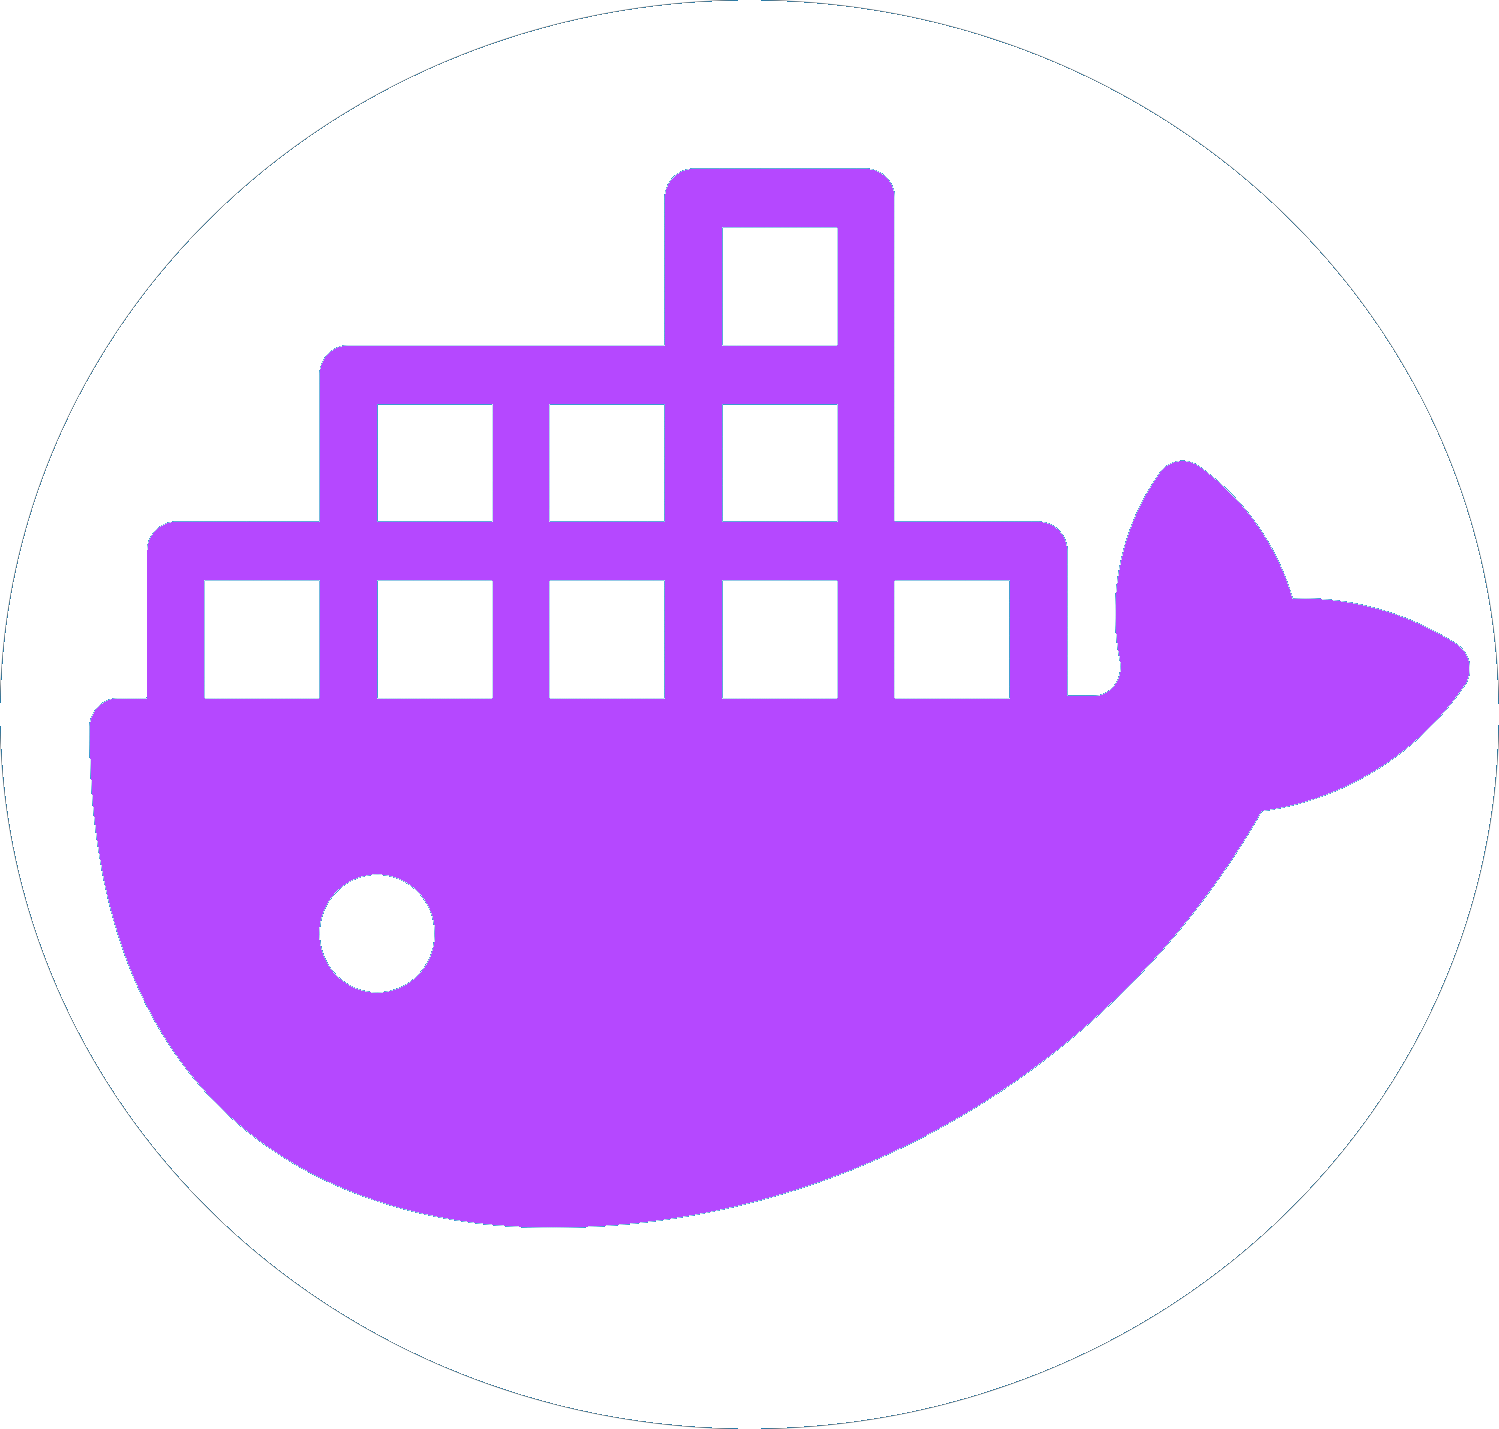 On hover Docker icon.